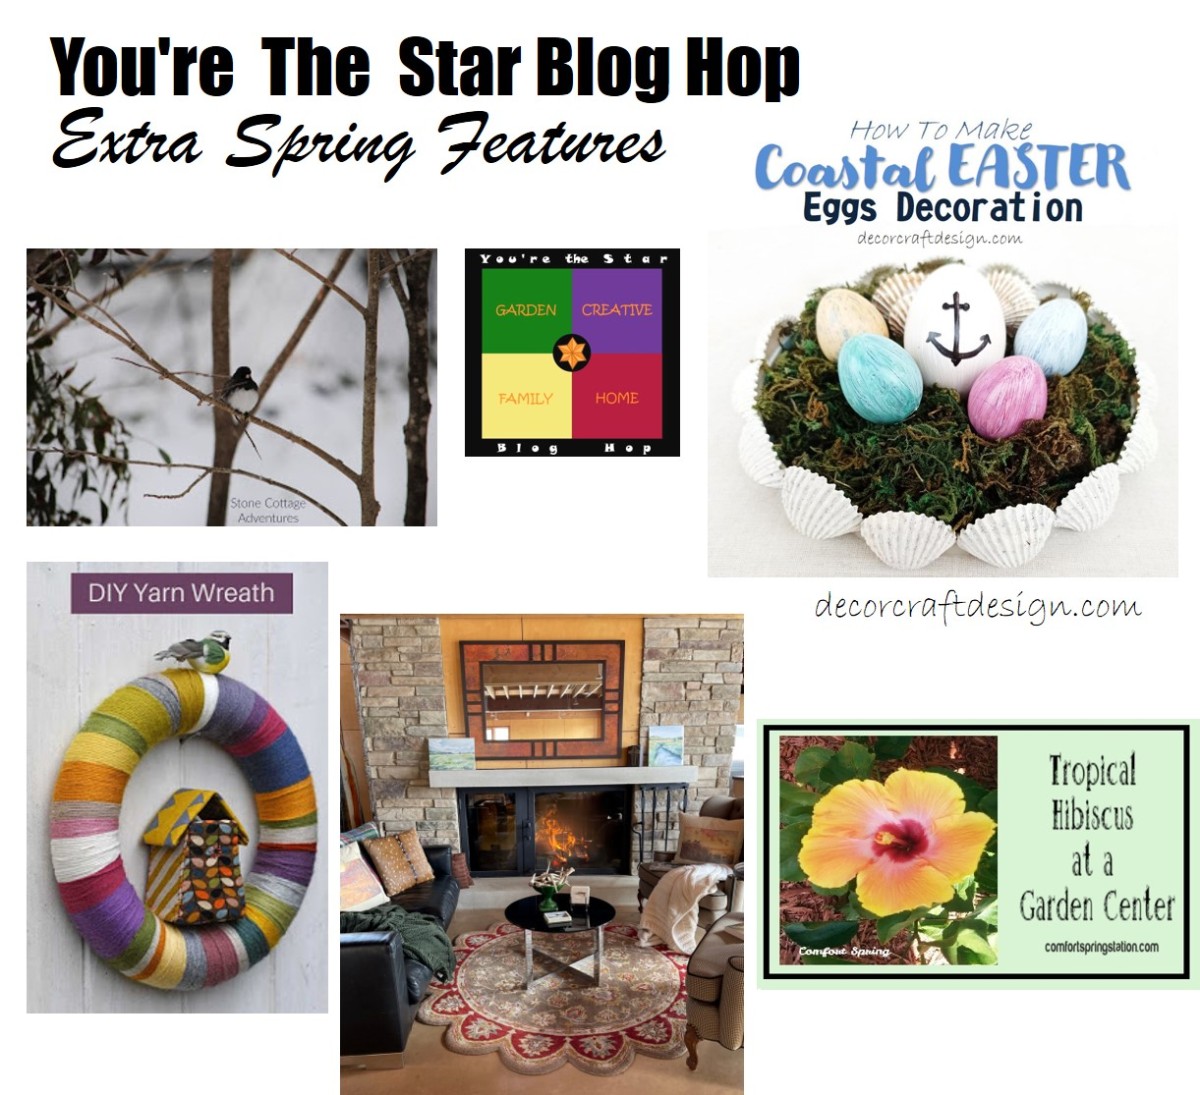 You’re The Star Blog Hop Extra Spring Features